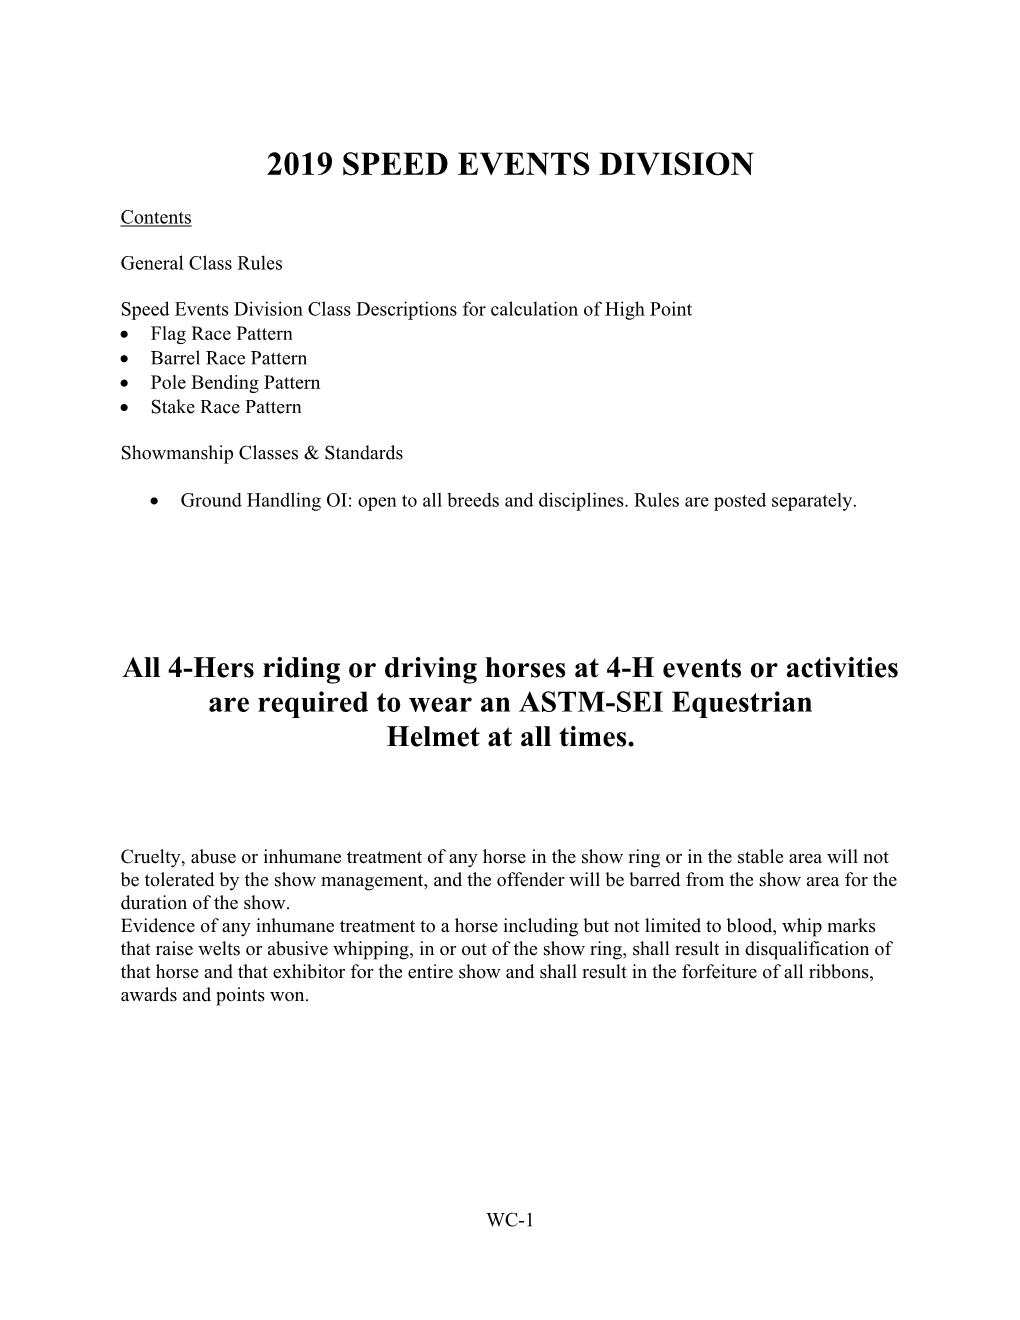 2019 Speed Events Division